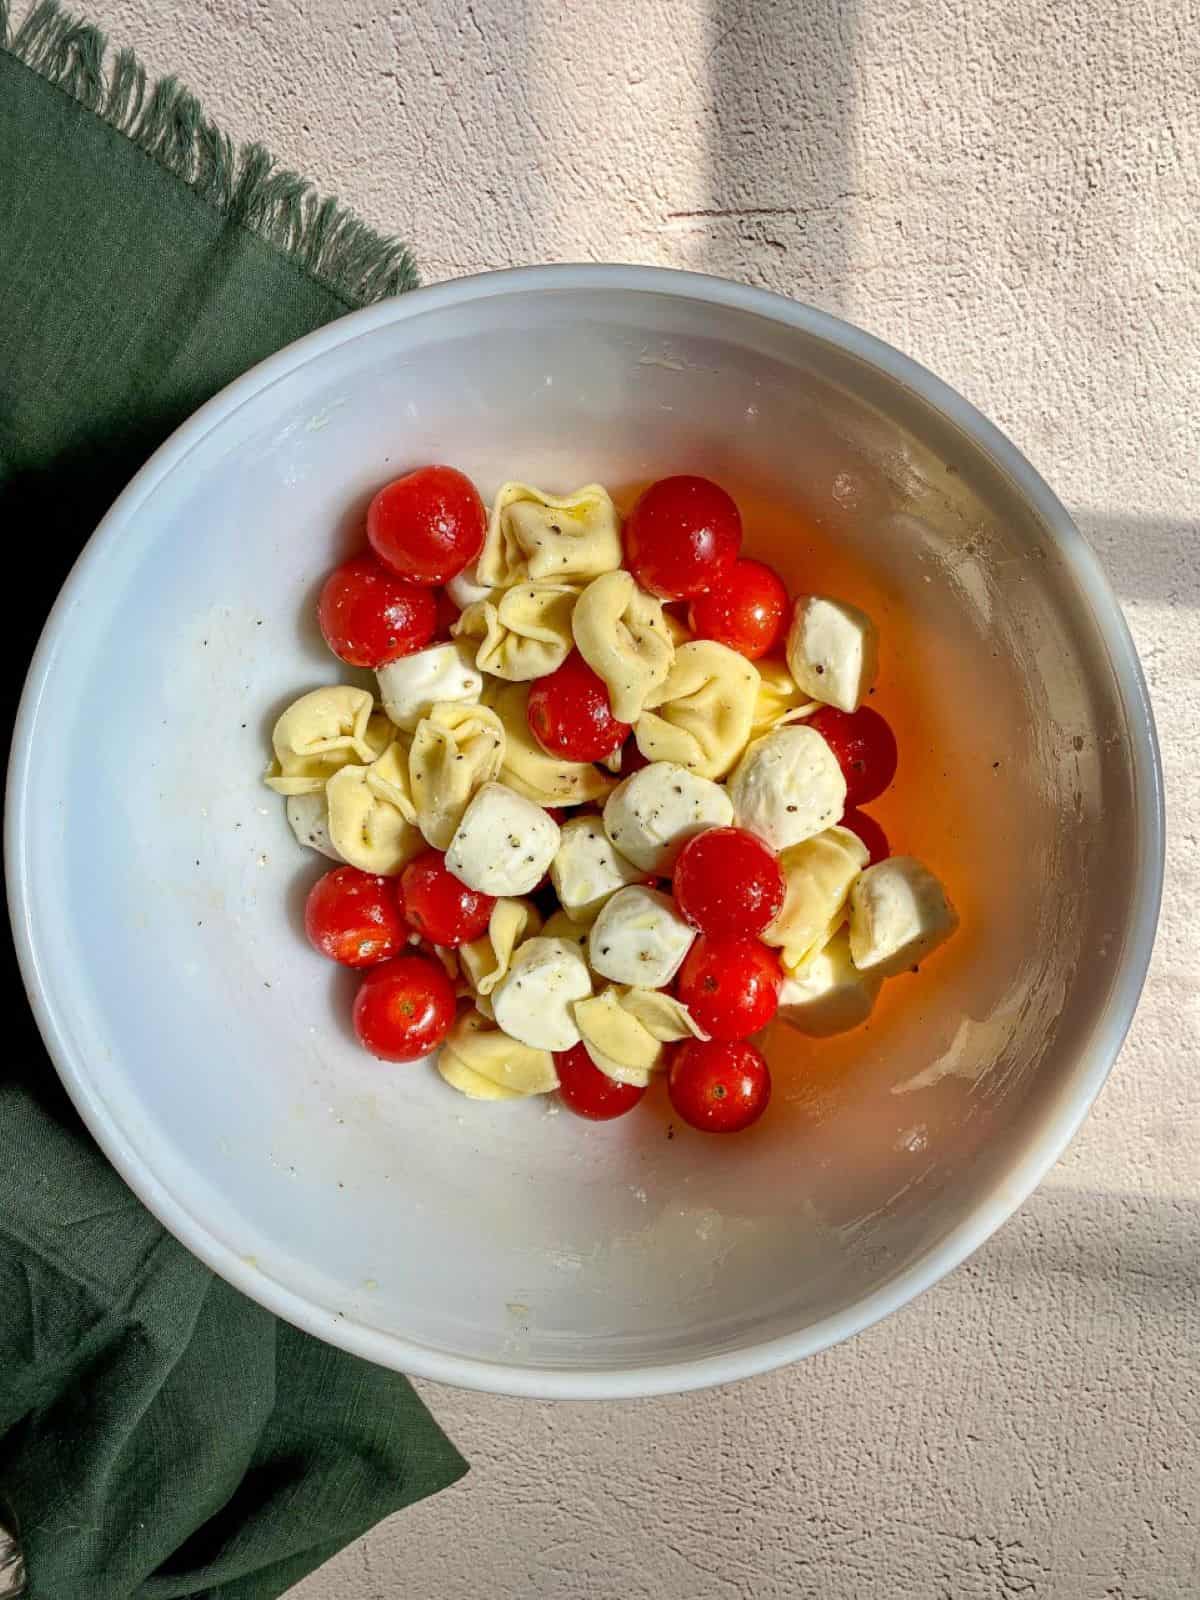 Cooked and chilled tortellini with tomatoes and mozzarella marinating in olive oil mixture in a medium sized bowl.